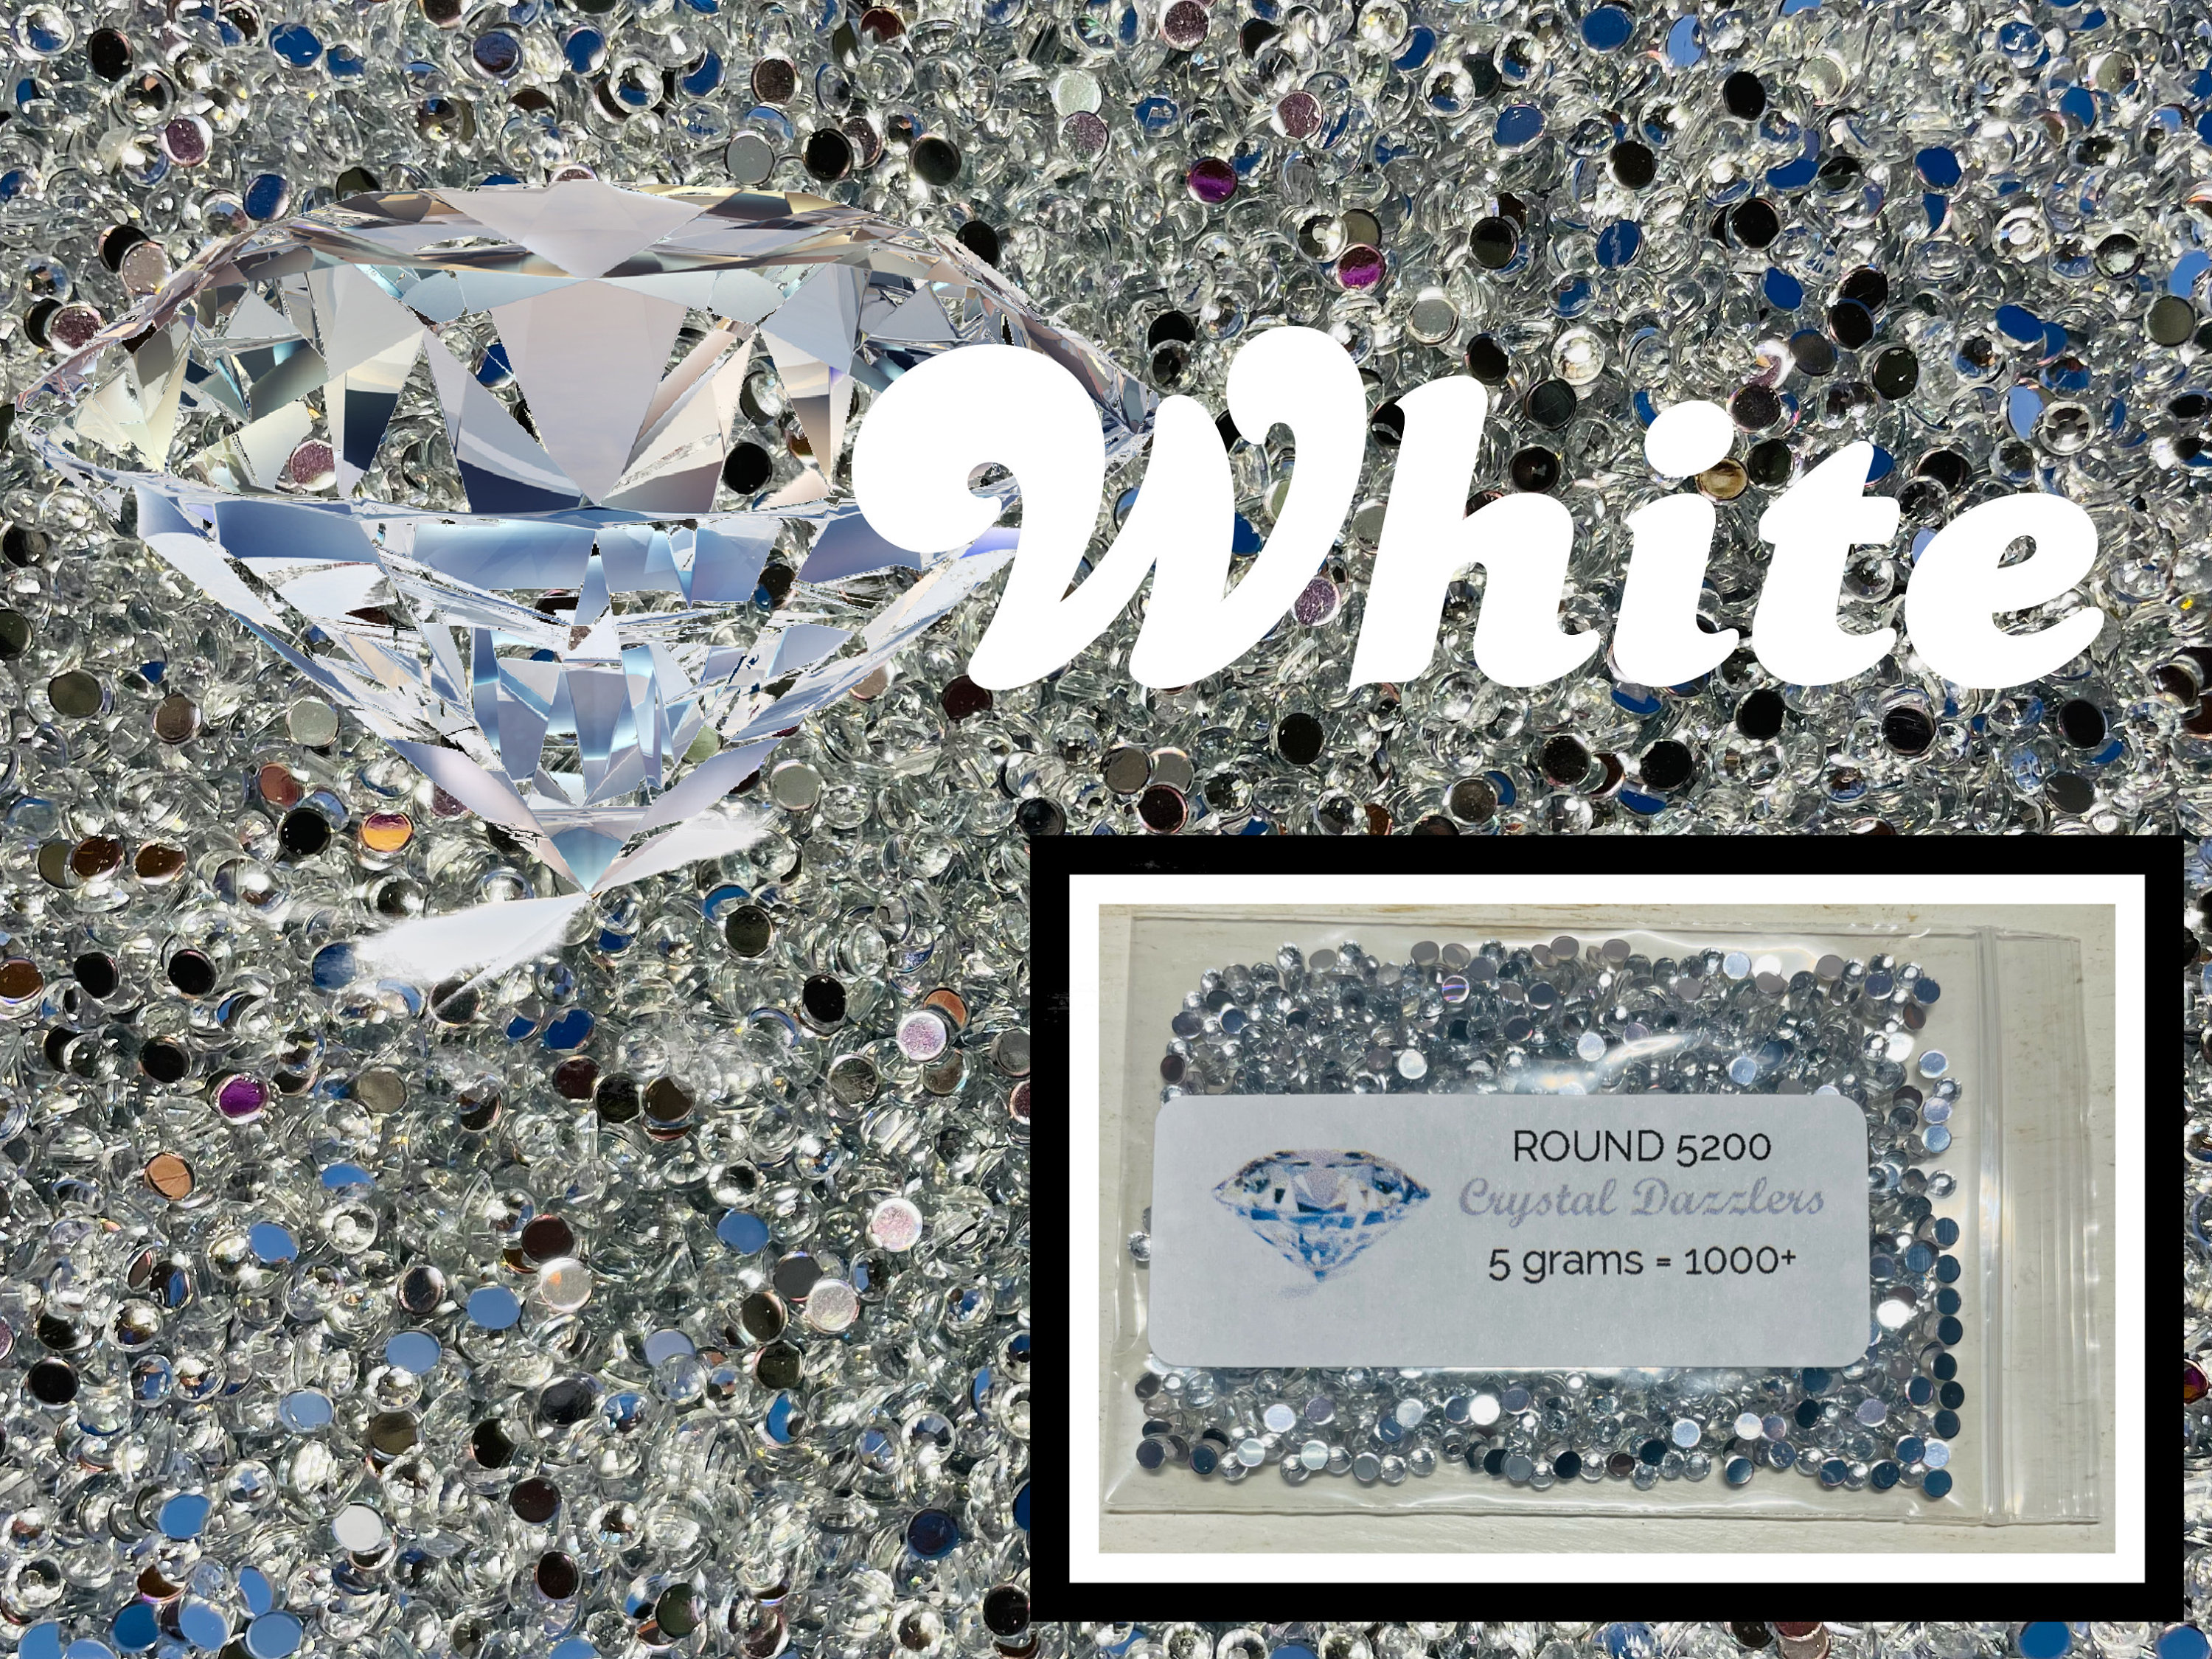 Clear Rhinestone Sheet by Recollections™